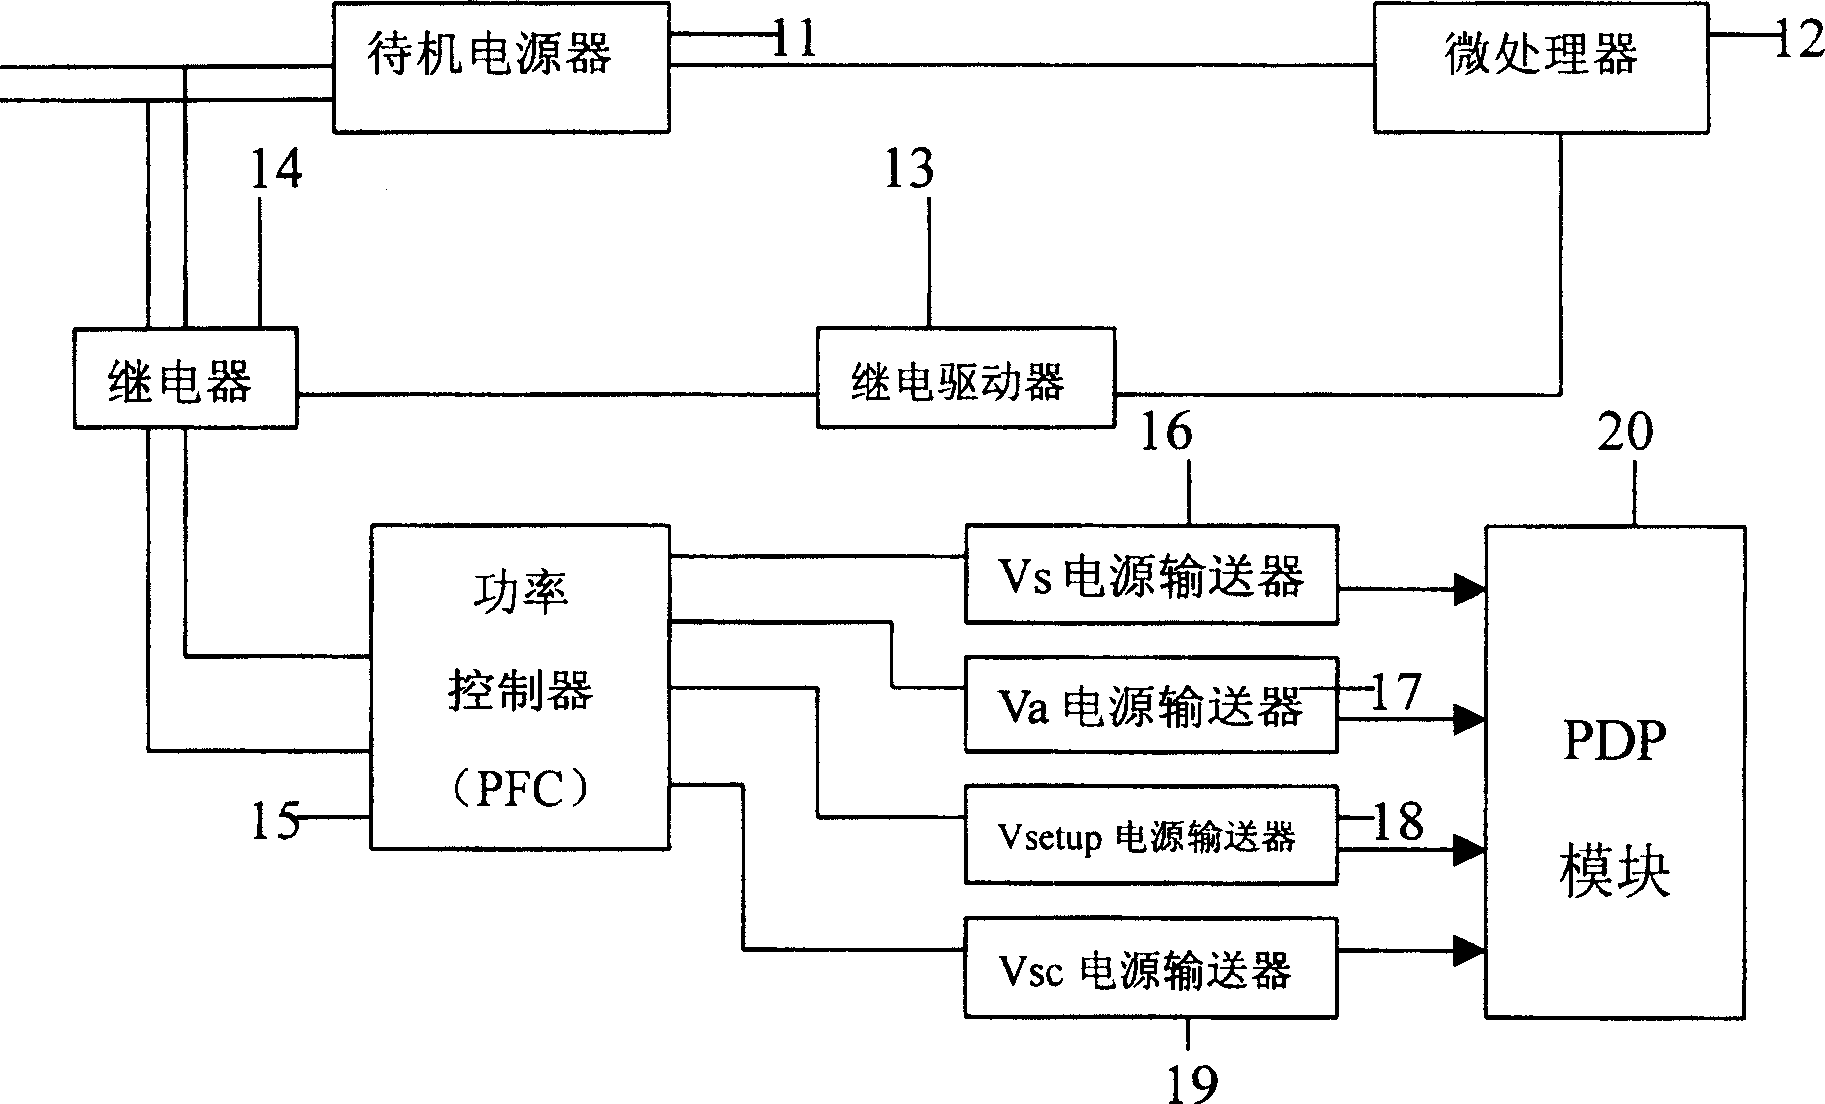 Power supply controller for plasma television